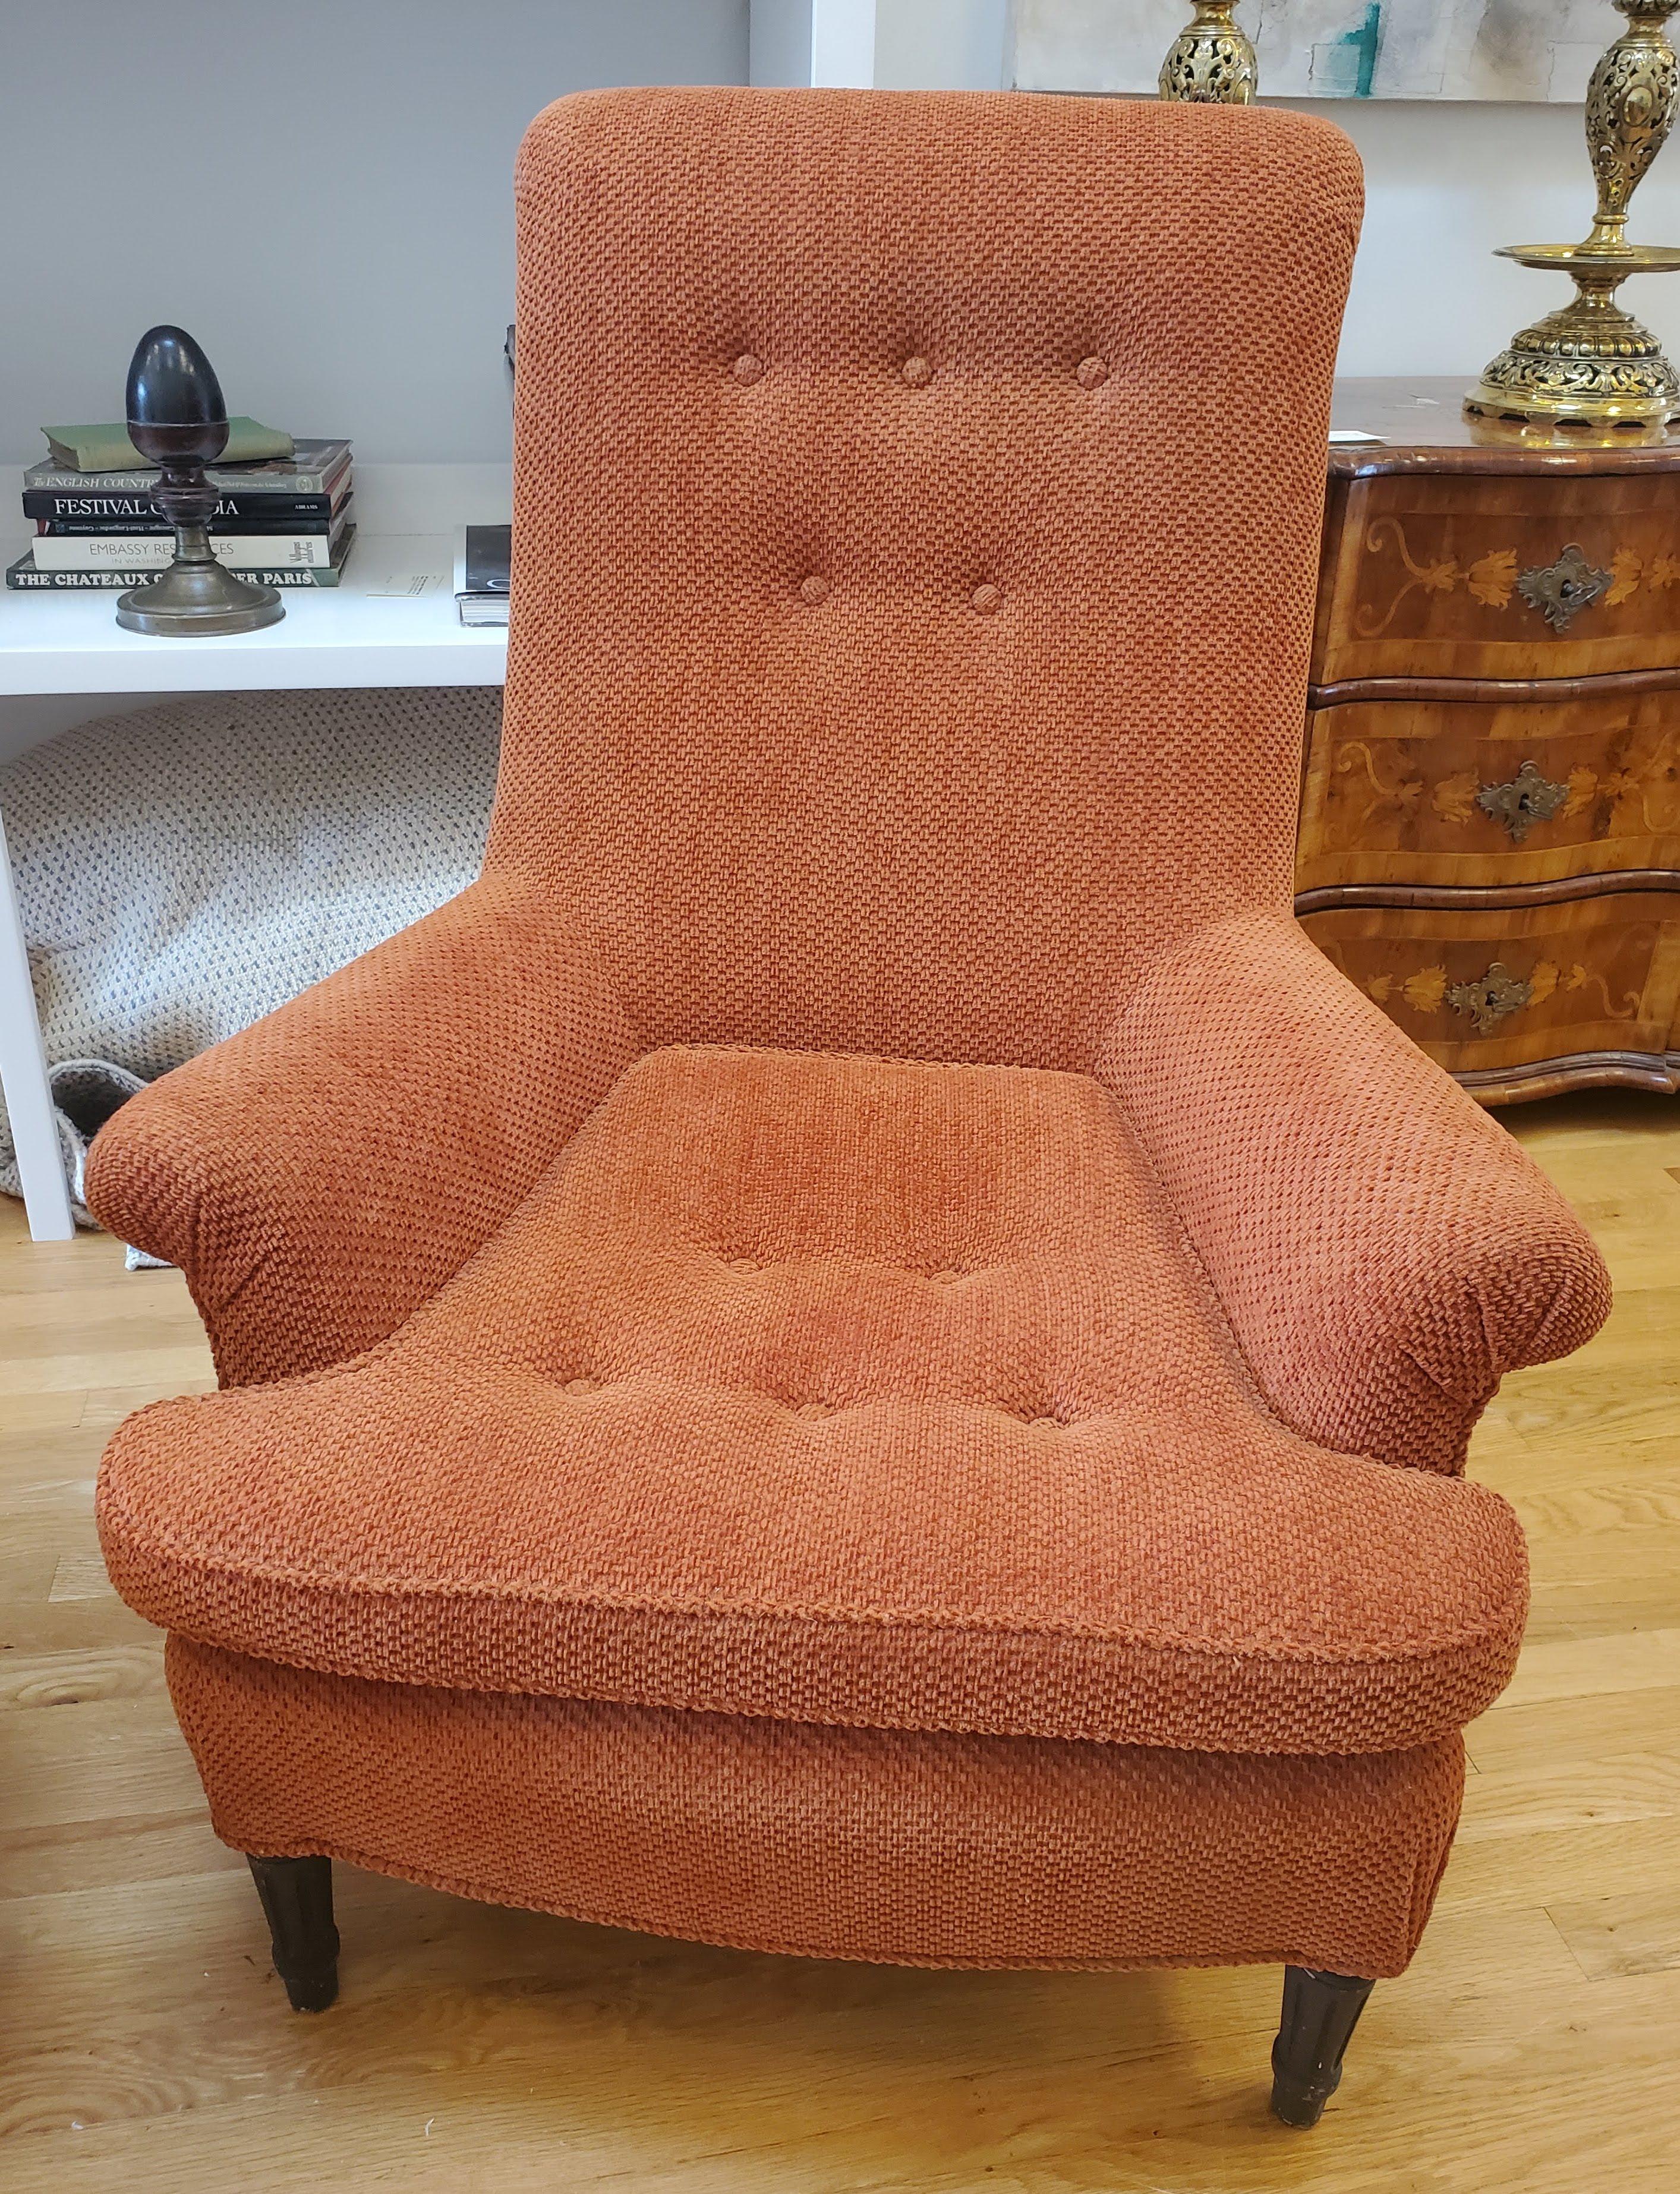 Pair of 19th Century English Club Chairs with Orange Chenille Upholstery For Sale 3